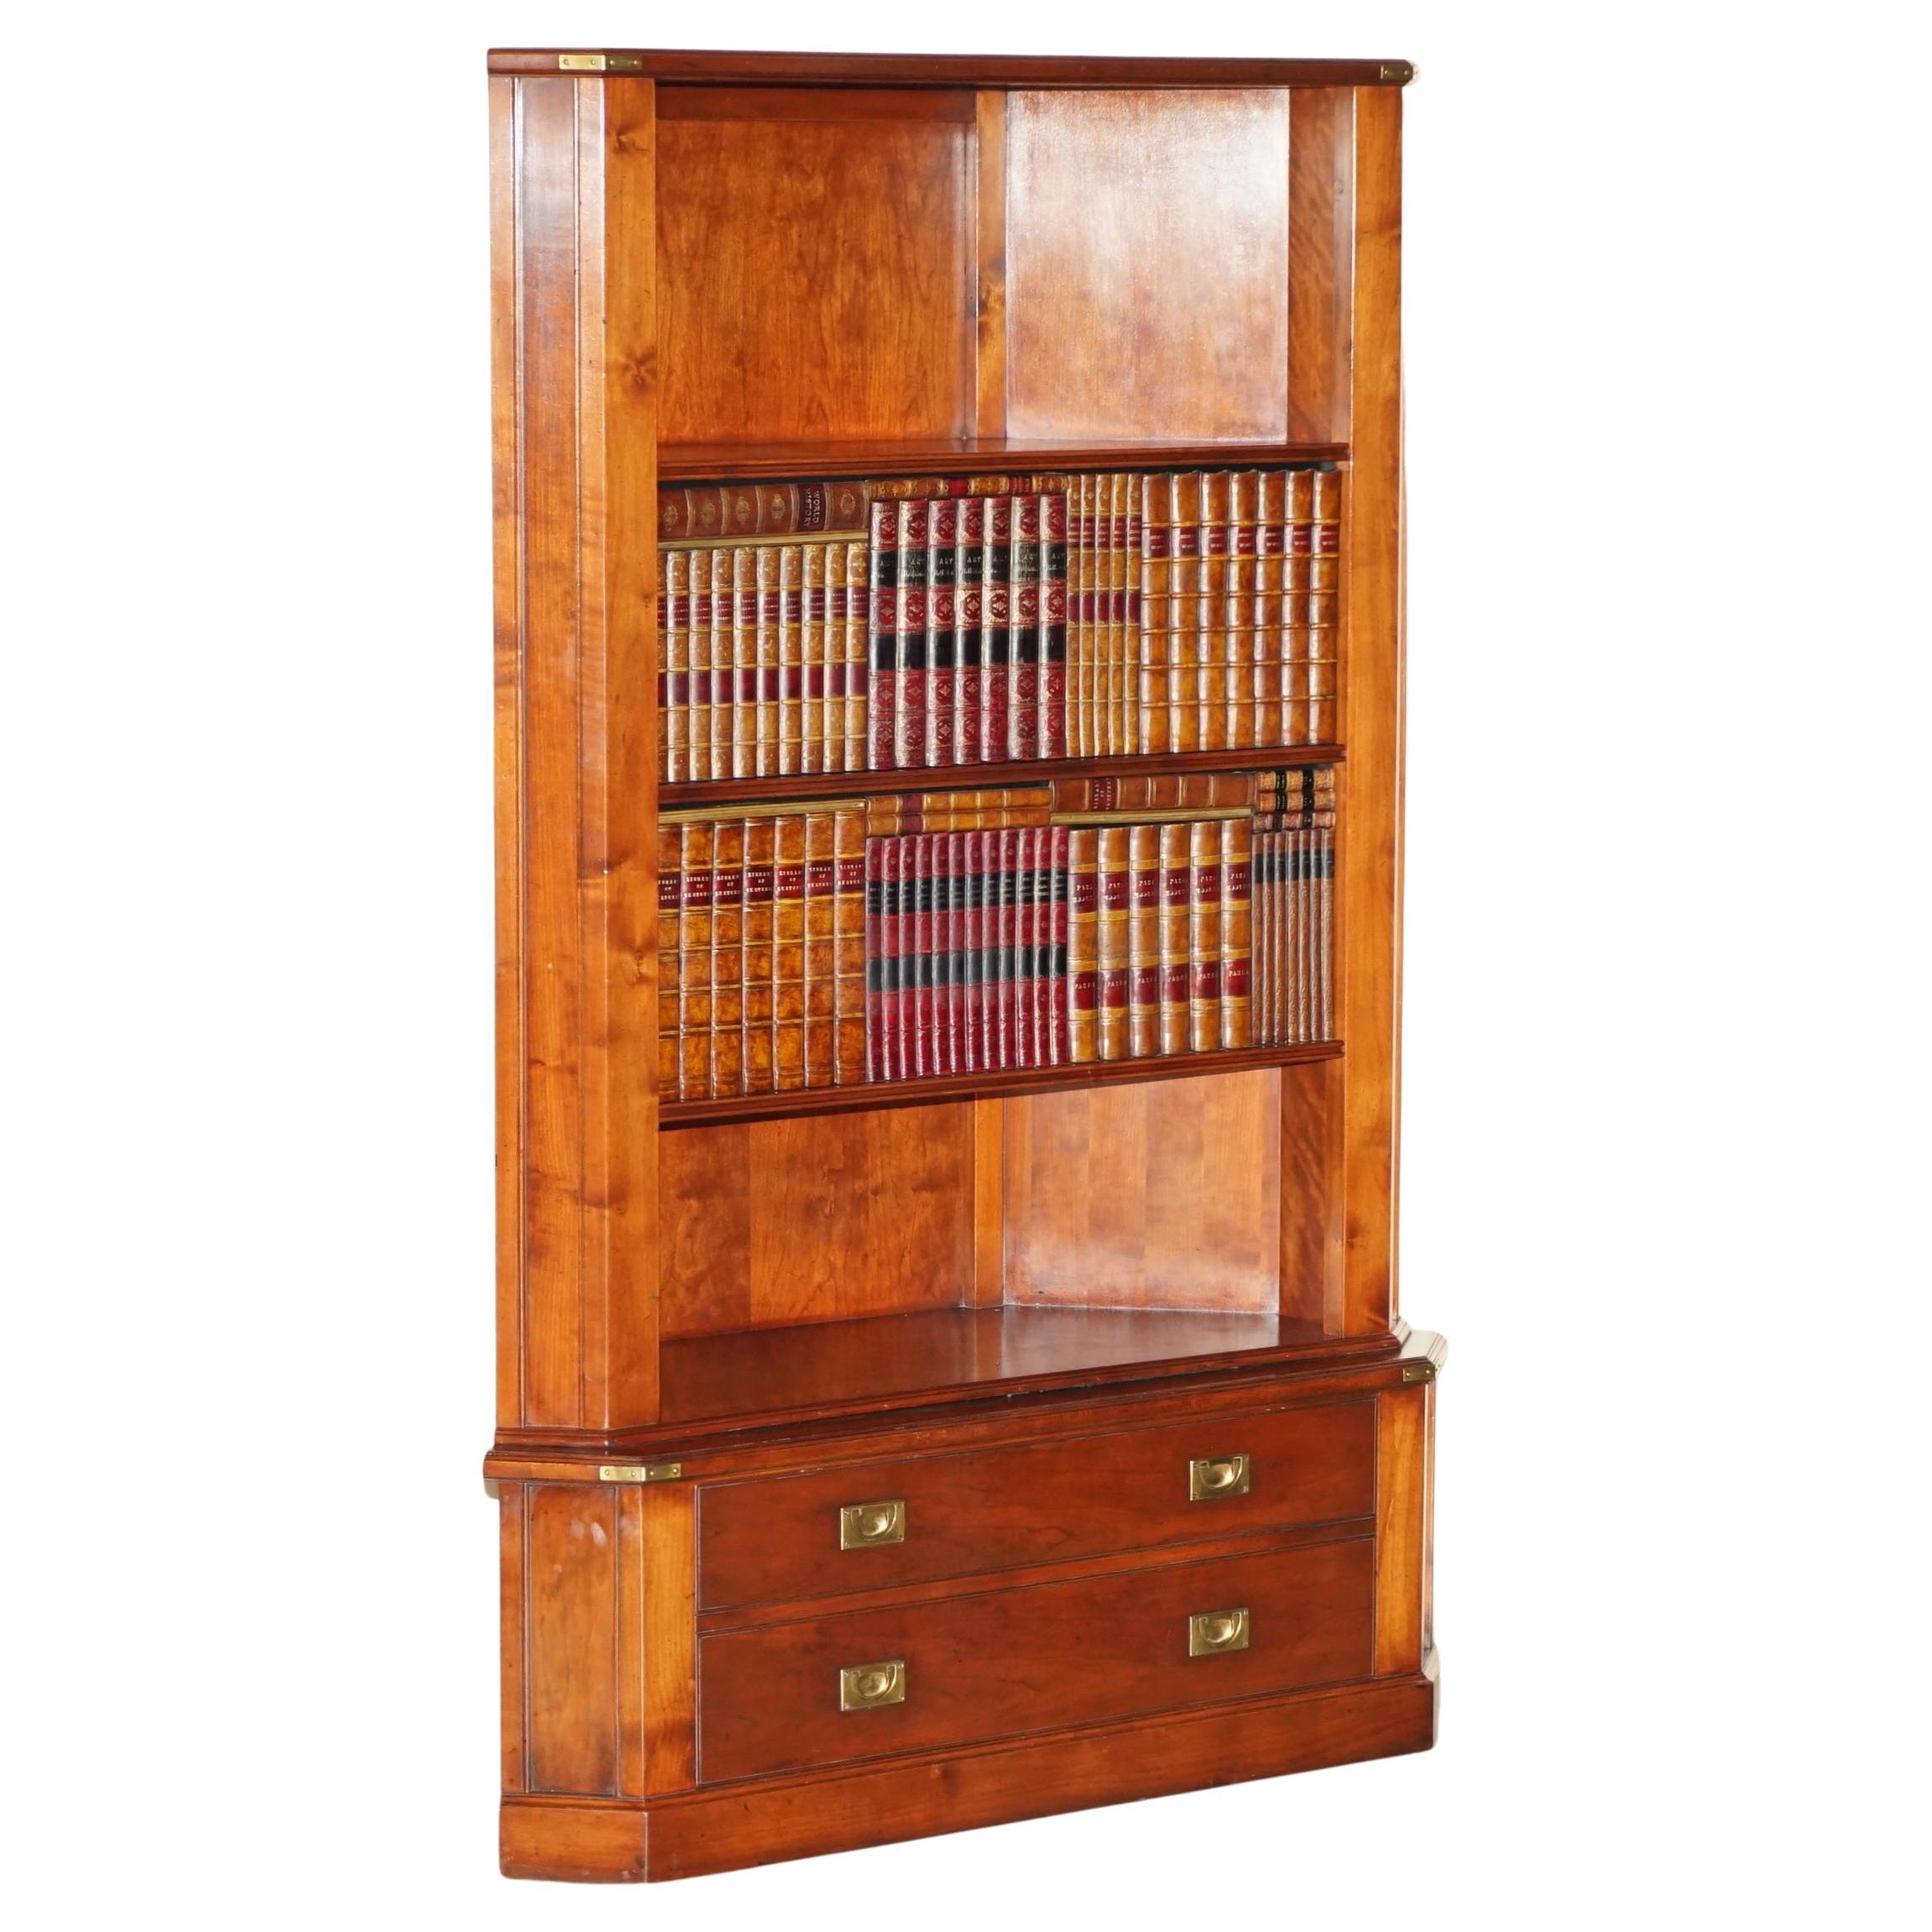 HARRODS LONDON KENNEDY HARDWOOD BOOKCASE HOME BAR CABINET FAUX BOOKs - 1 OF 2